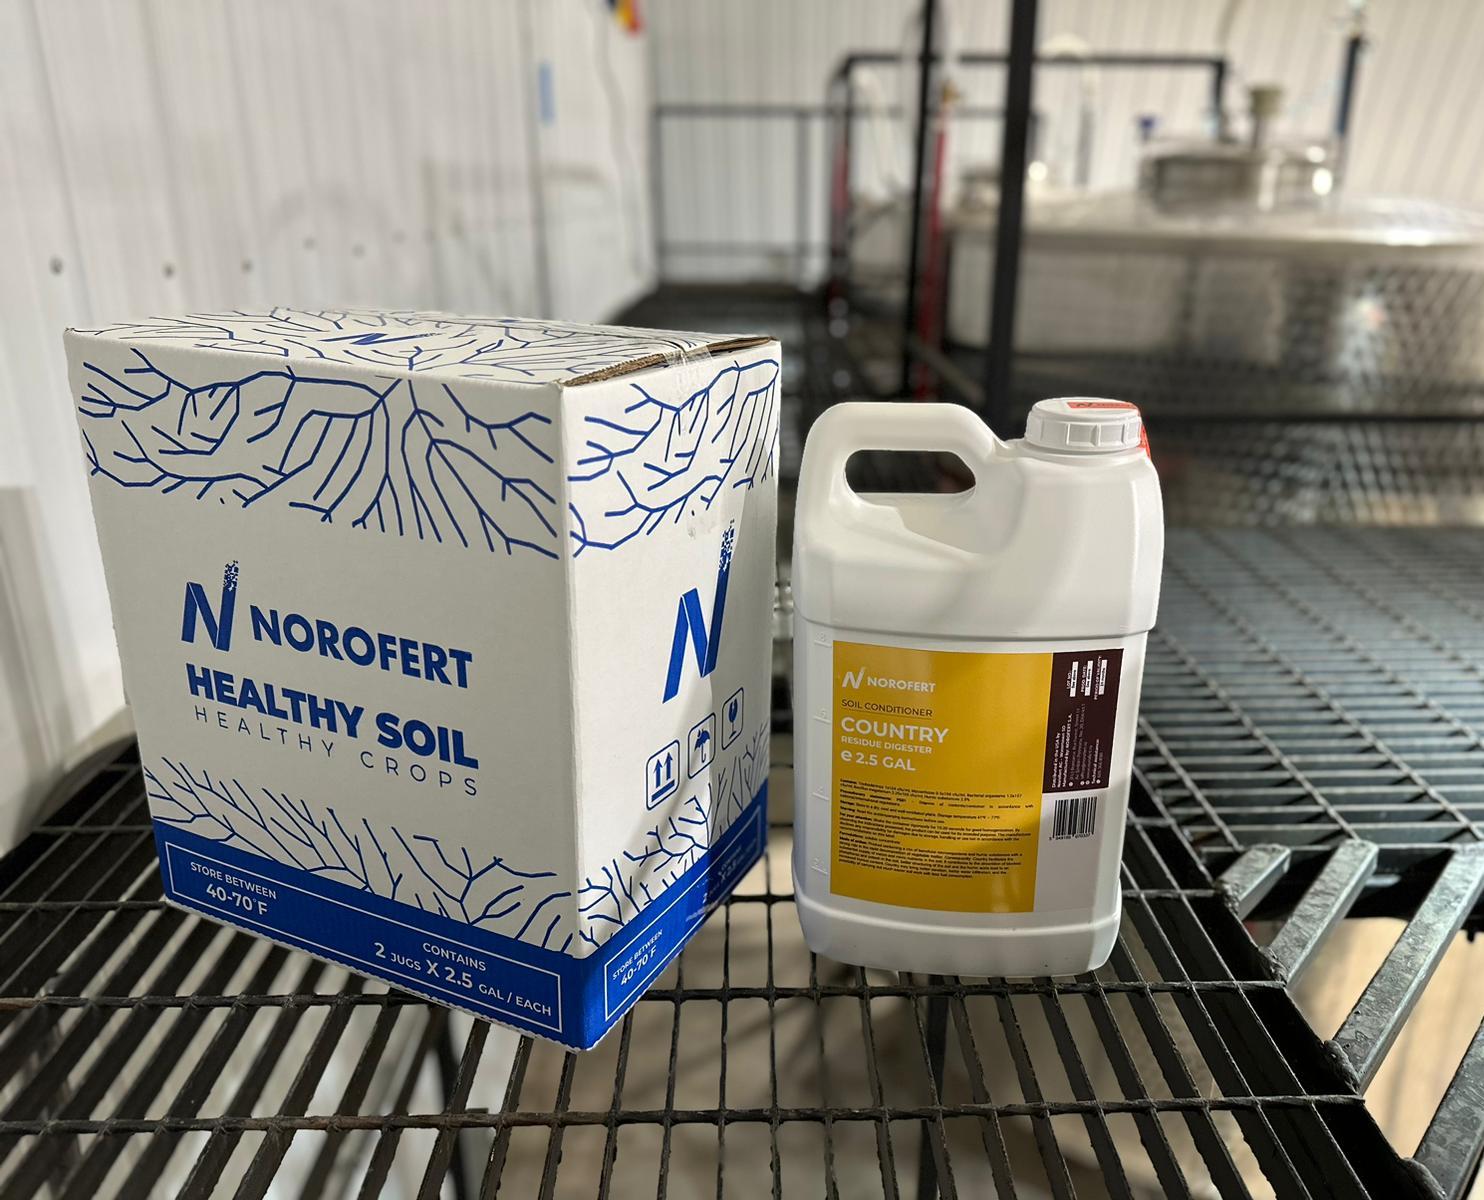 Norofert has finalized the fertilizer production line in the USA